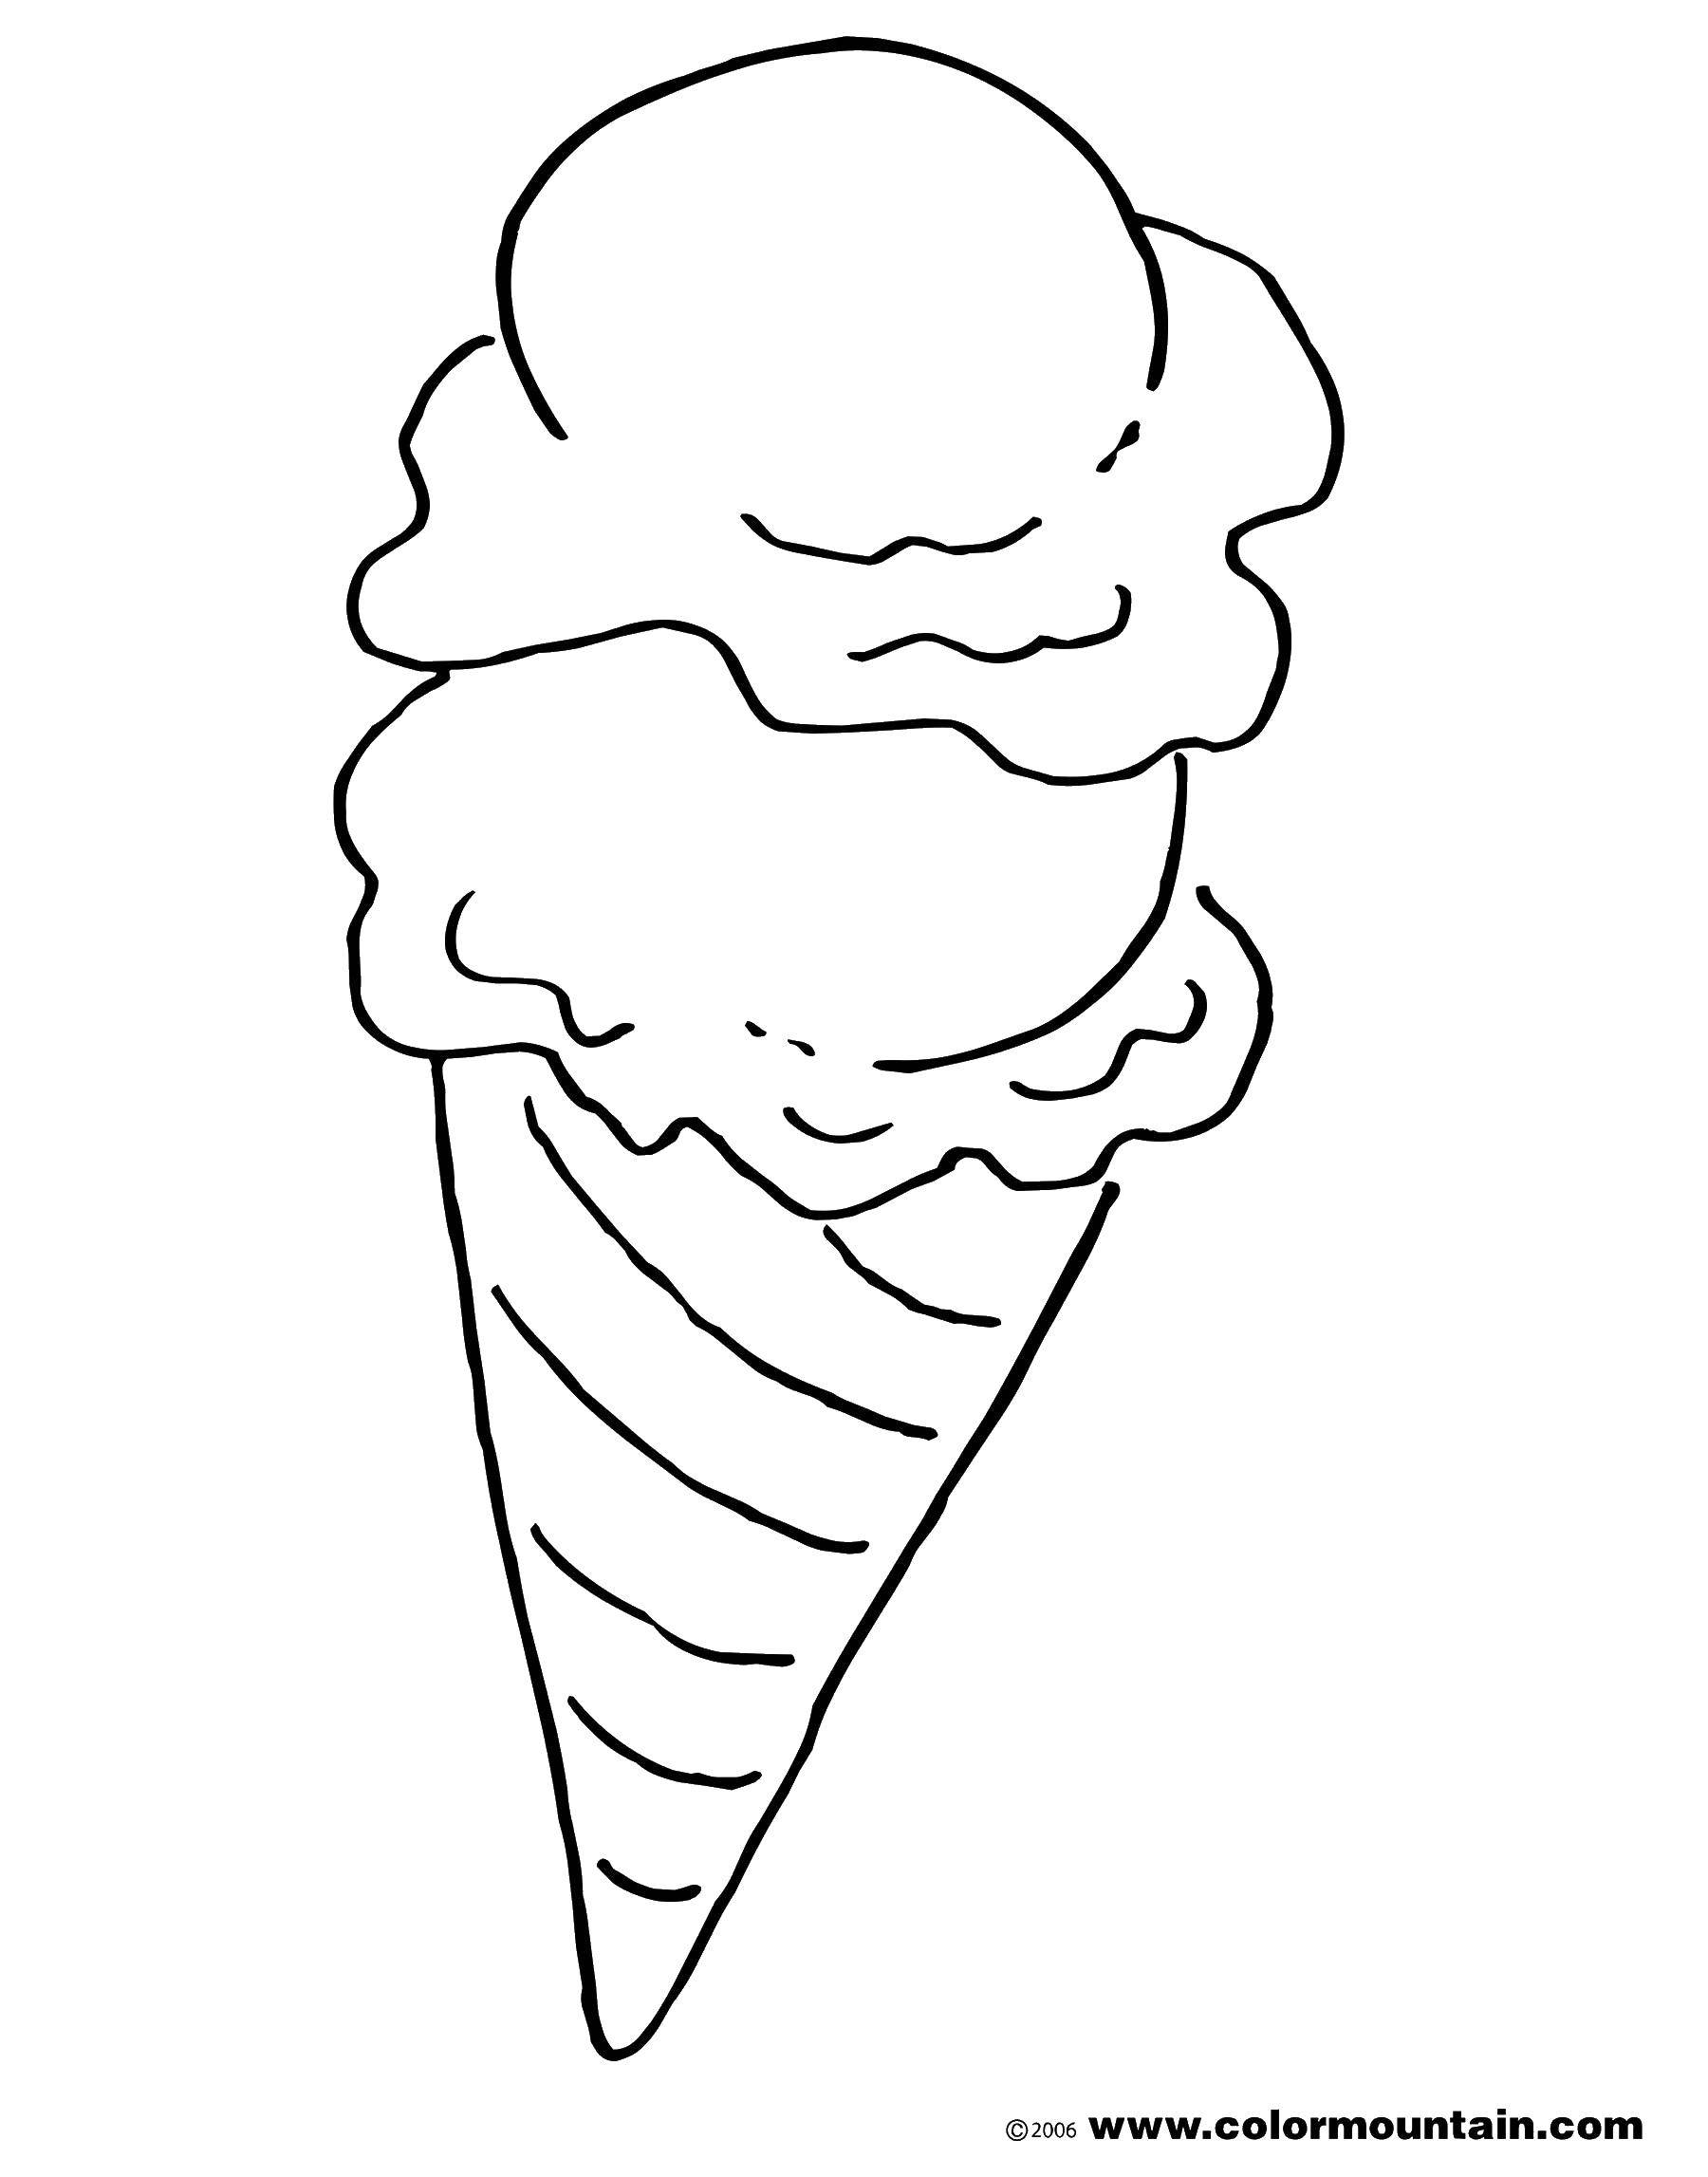 Coloring Two scoops of ice cream. Category ice cream. Tags:  Ice cream, sweetness, children.